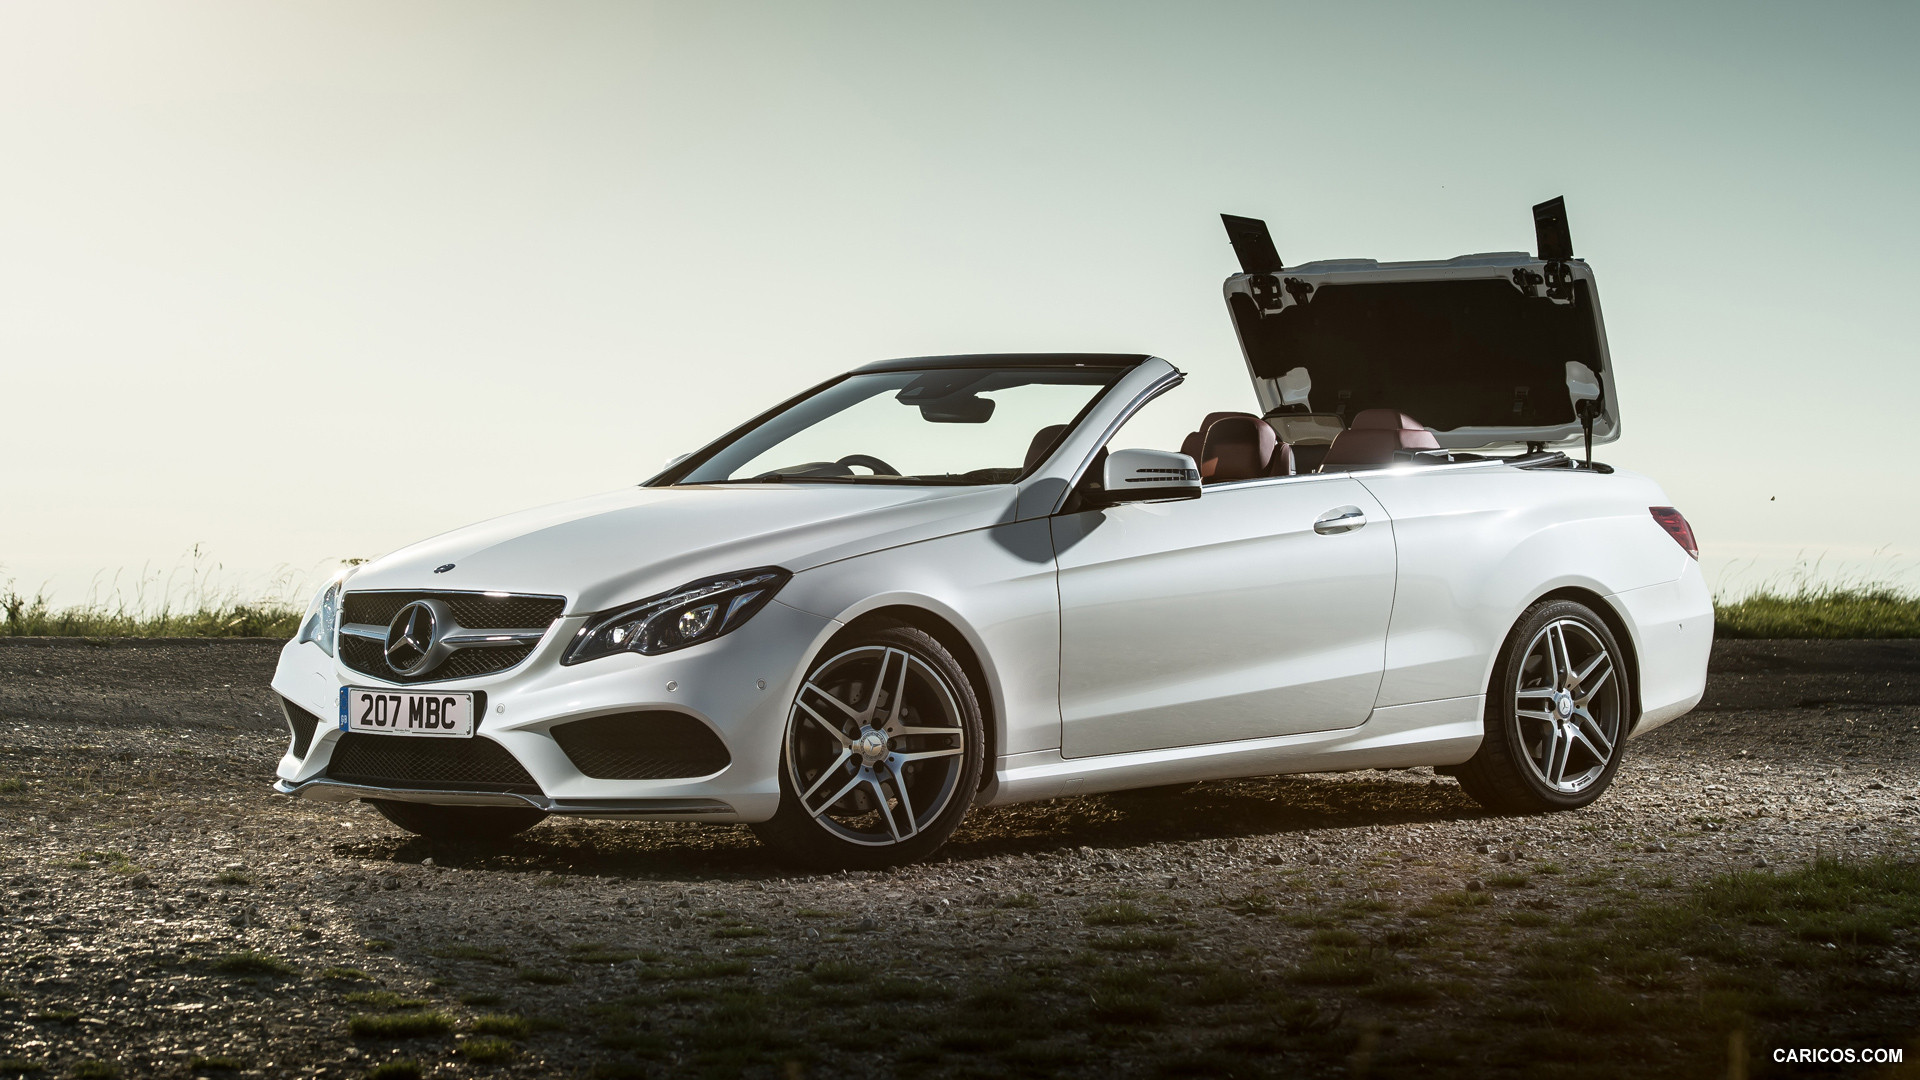 2014 Mercedes-Benz E-Class Cabriolet (UK-Version) - Top In Action - Side, #9 of 15